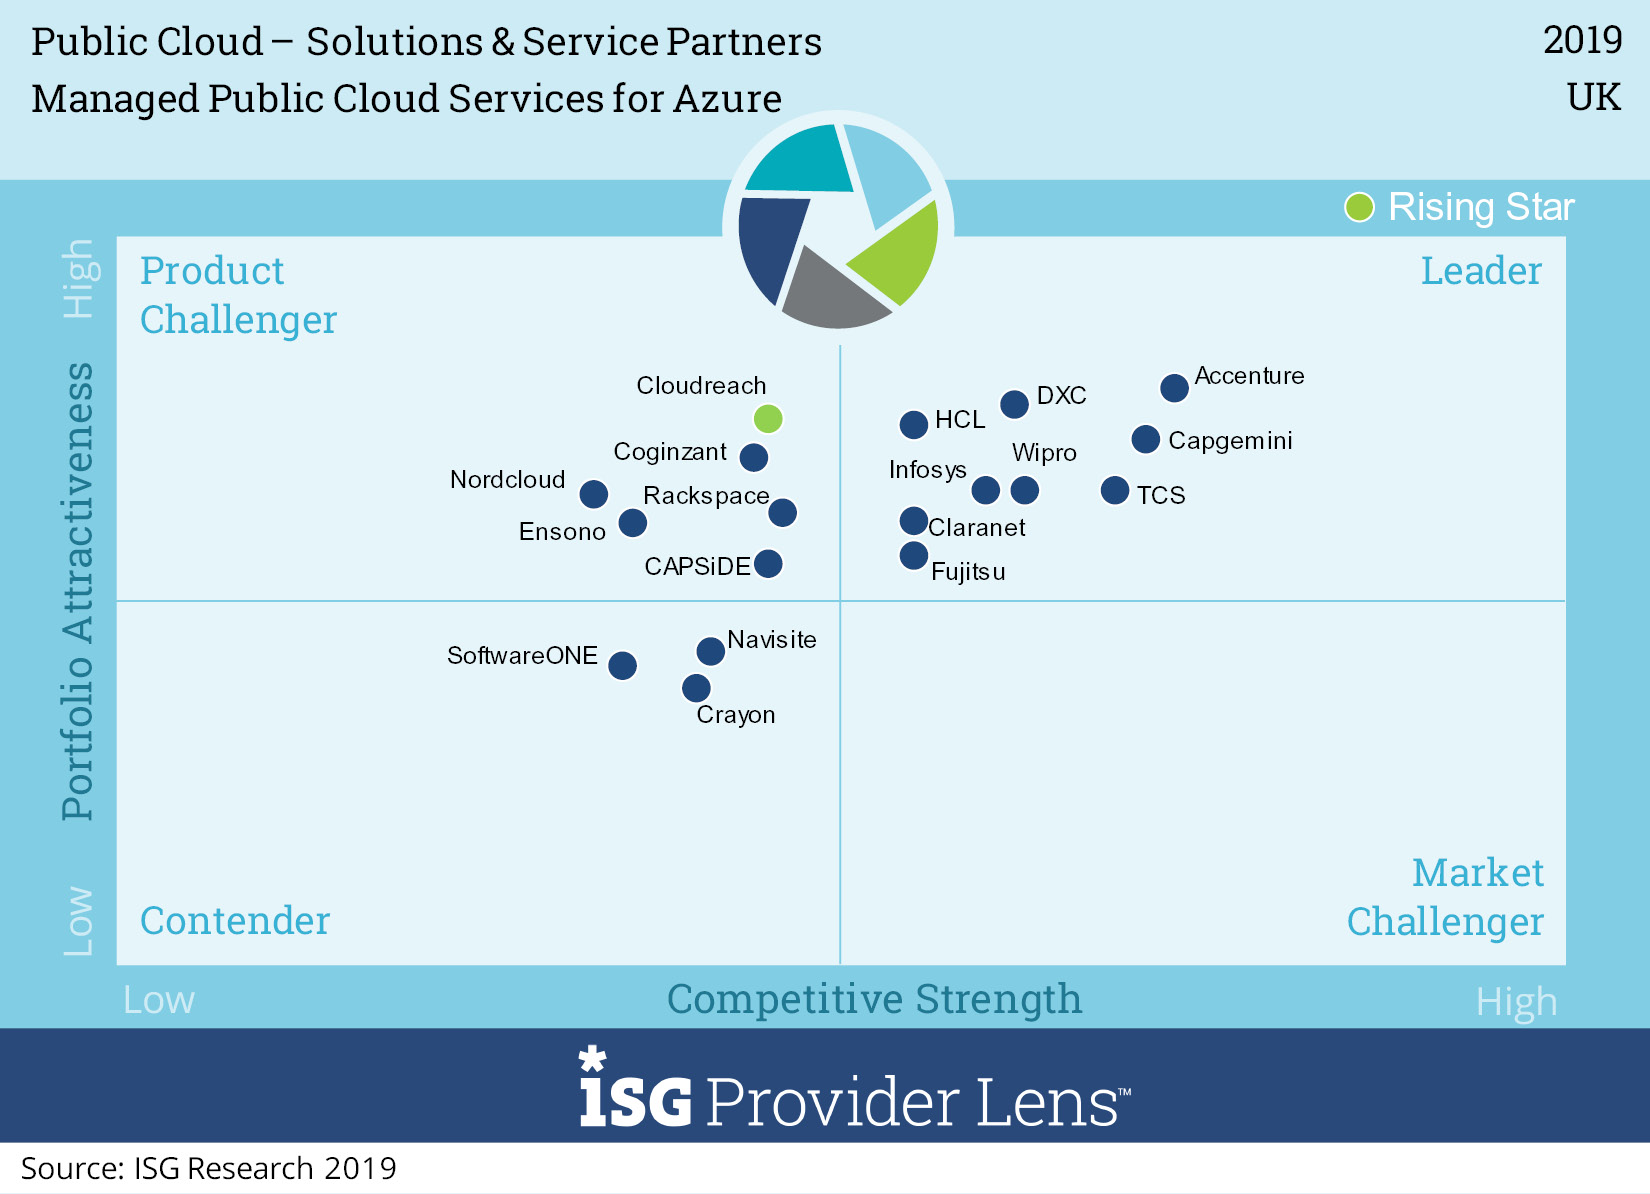 Wipro has been positioned as a US, UK, Nordics Leader in Public Cloud – Solutions & Service Partners - ISG Provider Lens™ study 2019 for Azure